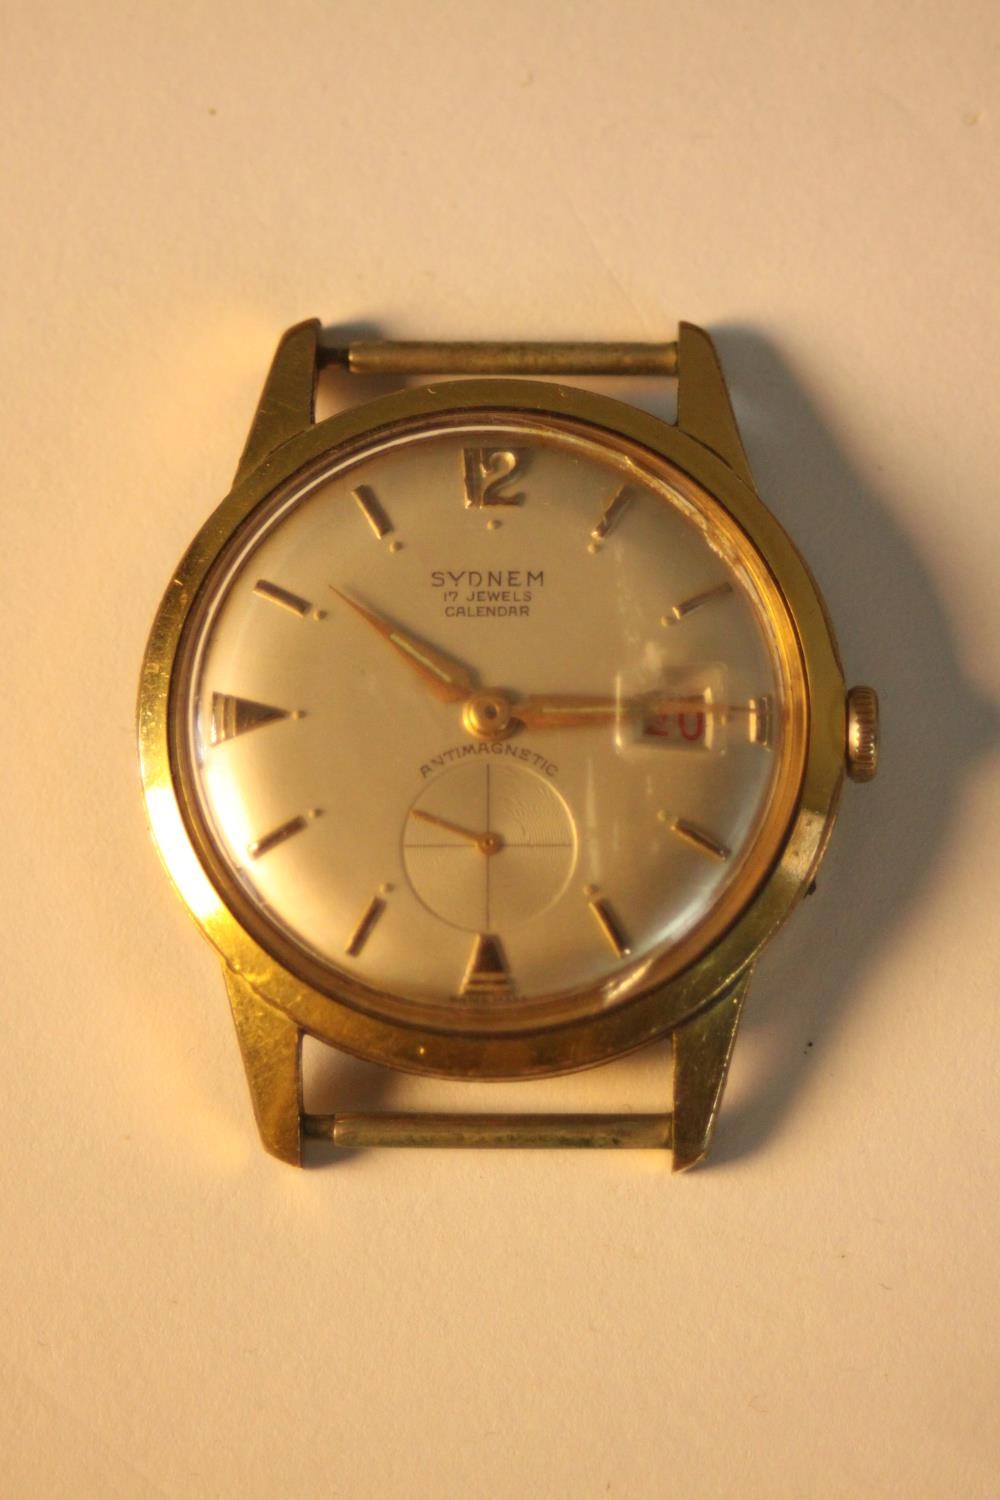 A Sydnem gentleman's automatic antimagnetic 10ct gold plated watch with calendar and rose gold - Image 9 of 11